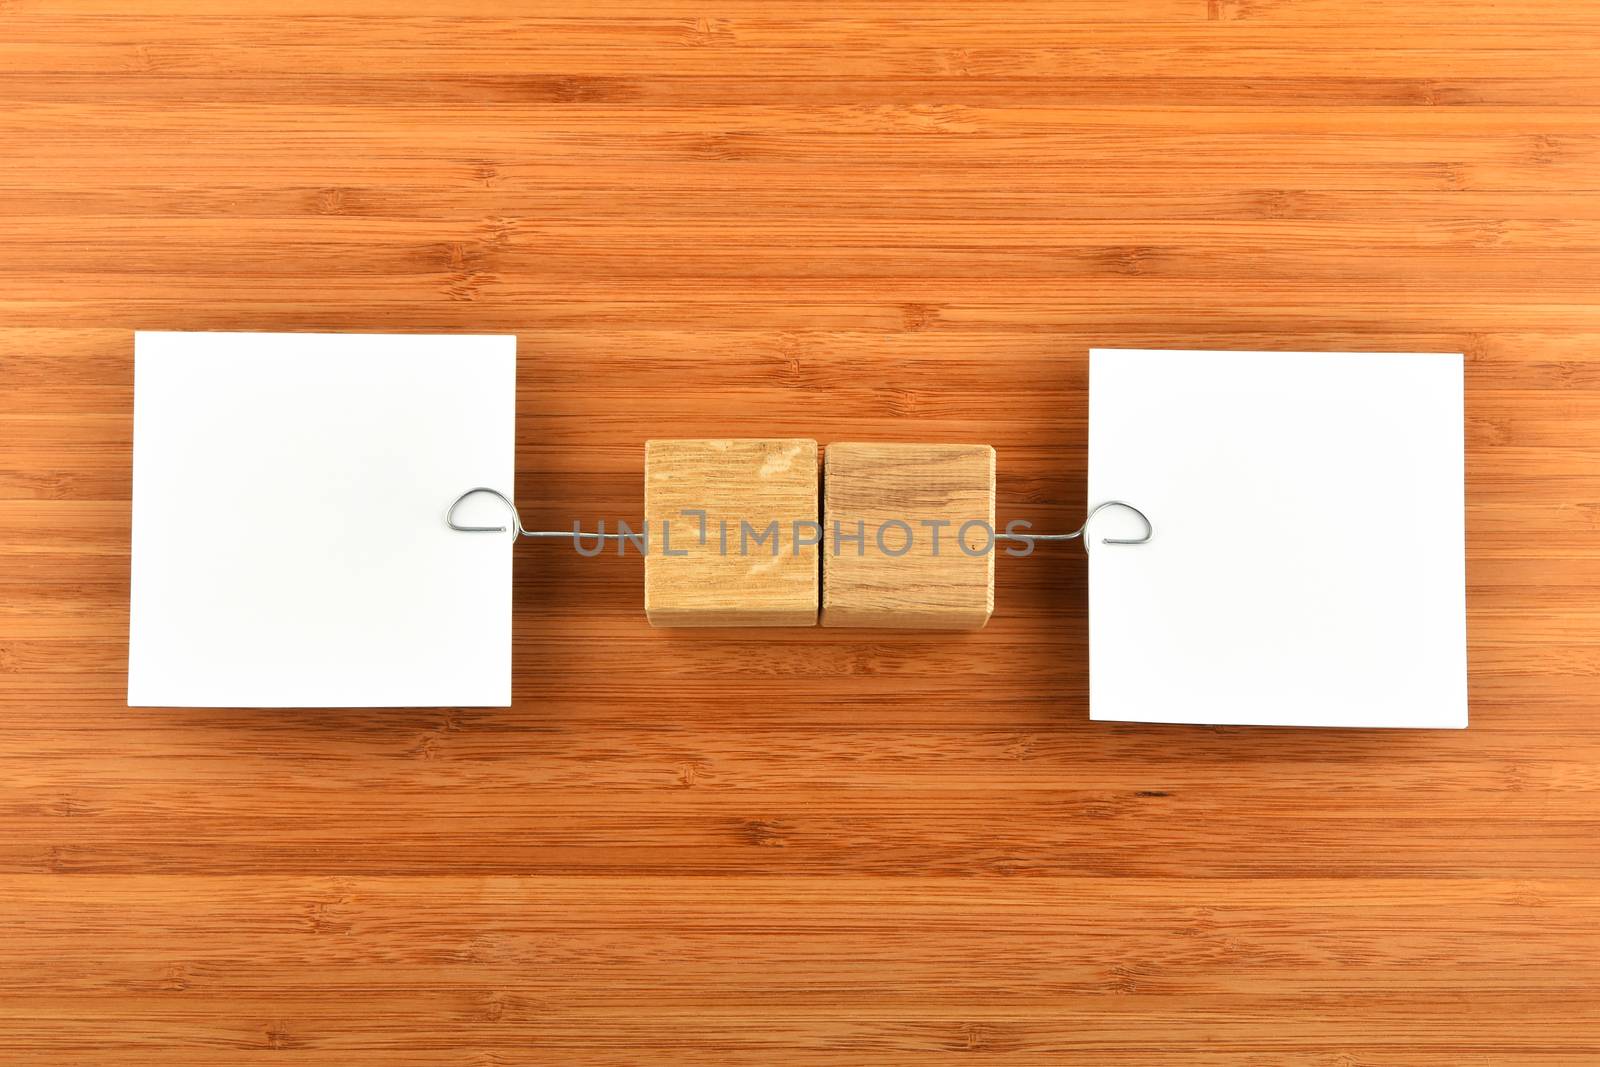 Opposite Opinions - Two white paper notes with wooden holders in different directions on bamboo wooden background for presentation